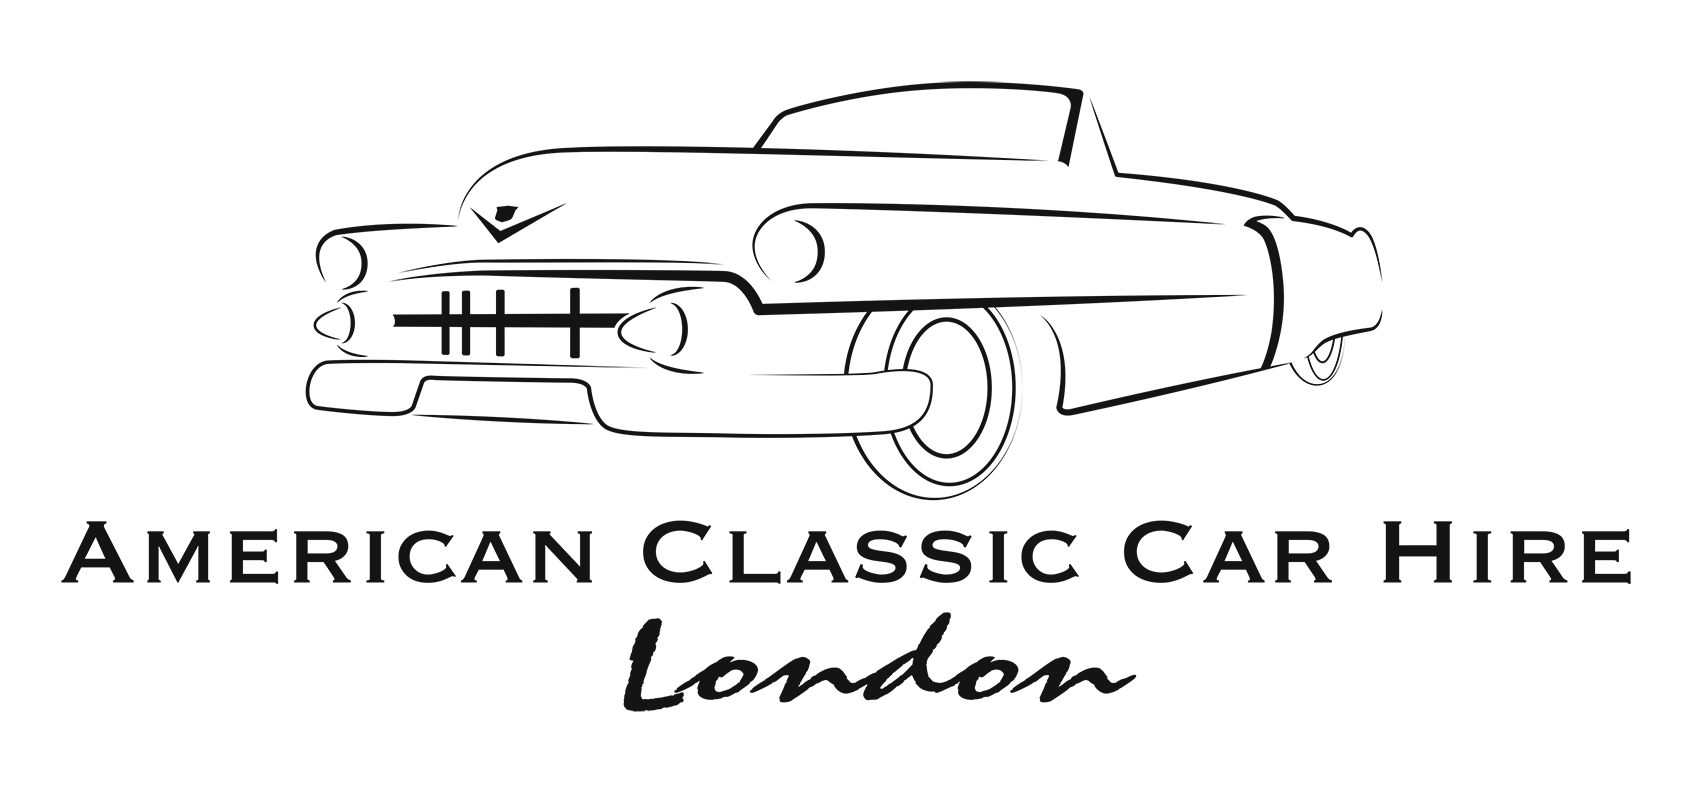 American Clssic Car Hire in London